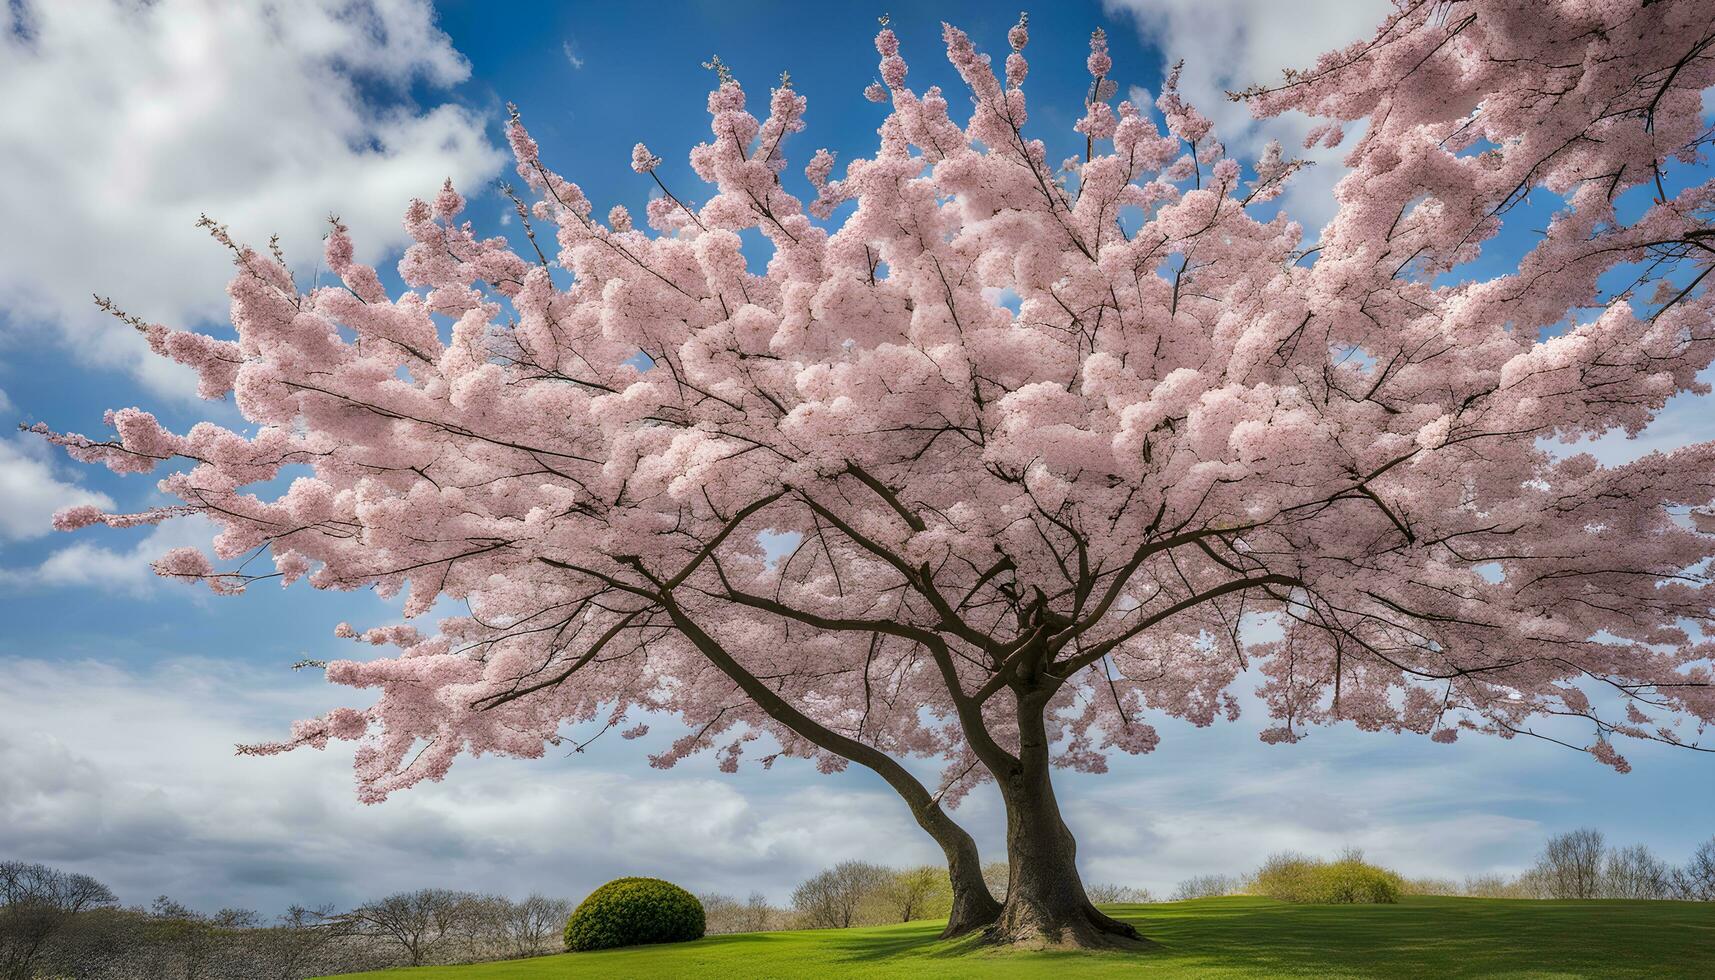 AI generated a large pink tree with white flowers in the spring photo